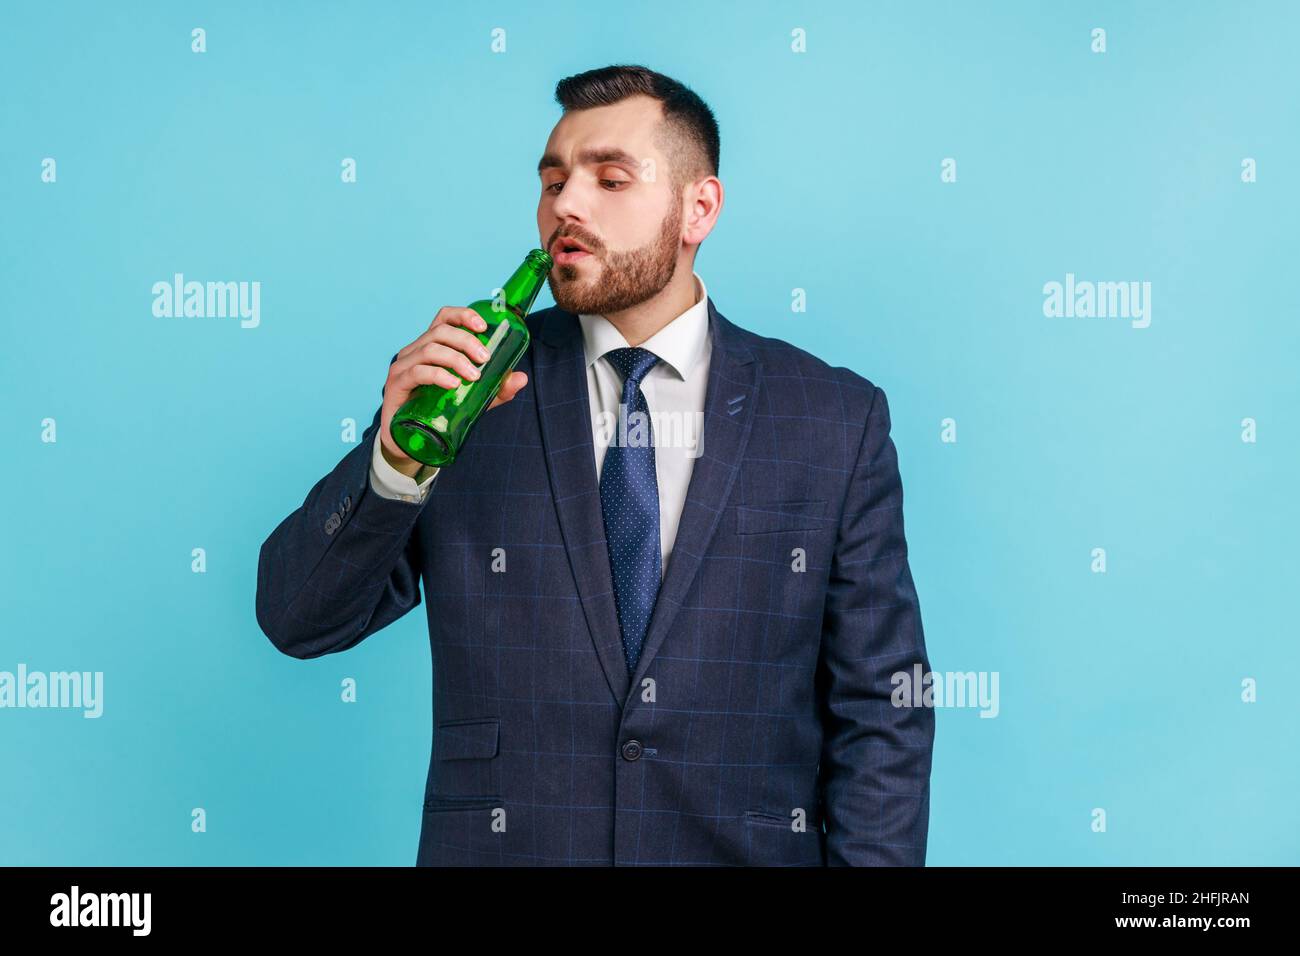 Bearded young adult businessman wearing official style suit drinking alcohol, holding beer bottle in hand, suffering from alcoholism. Indoor studio shot isolated on blue background. Stock Photo